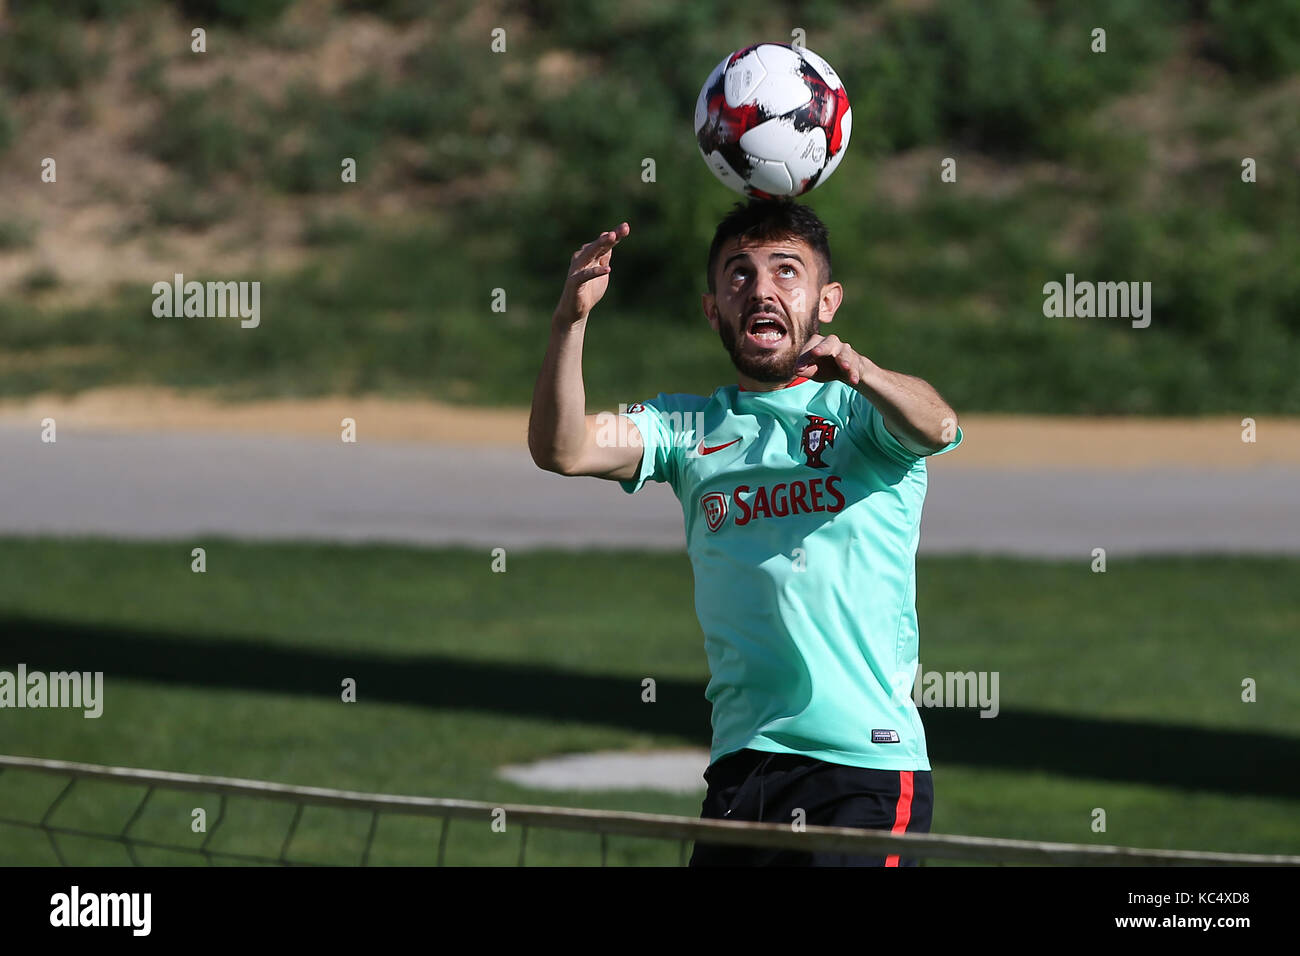 Lisbon, Portugal. 3rd Oct, 2017. Portugal's midfielder Bernardo Silva in action during the National Team Training session before the match between Portugal and Andorra at City Football in Oeiras, Lisbon on October 3, 2017. Credit: Bruno Barros/Alamy Live News Stock Photo